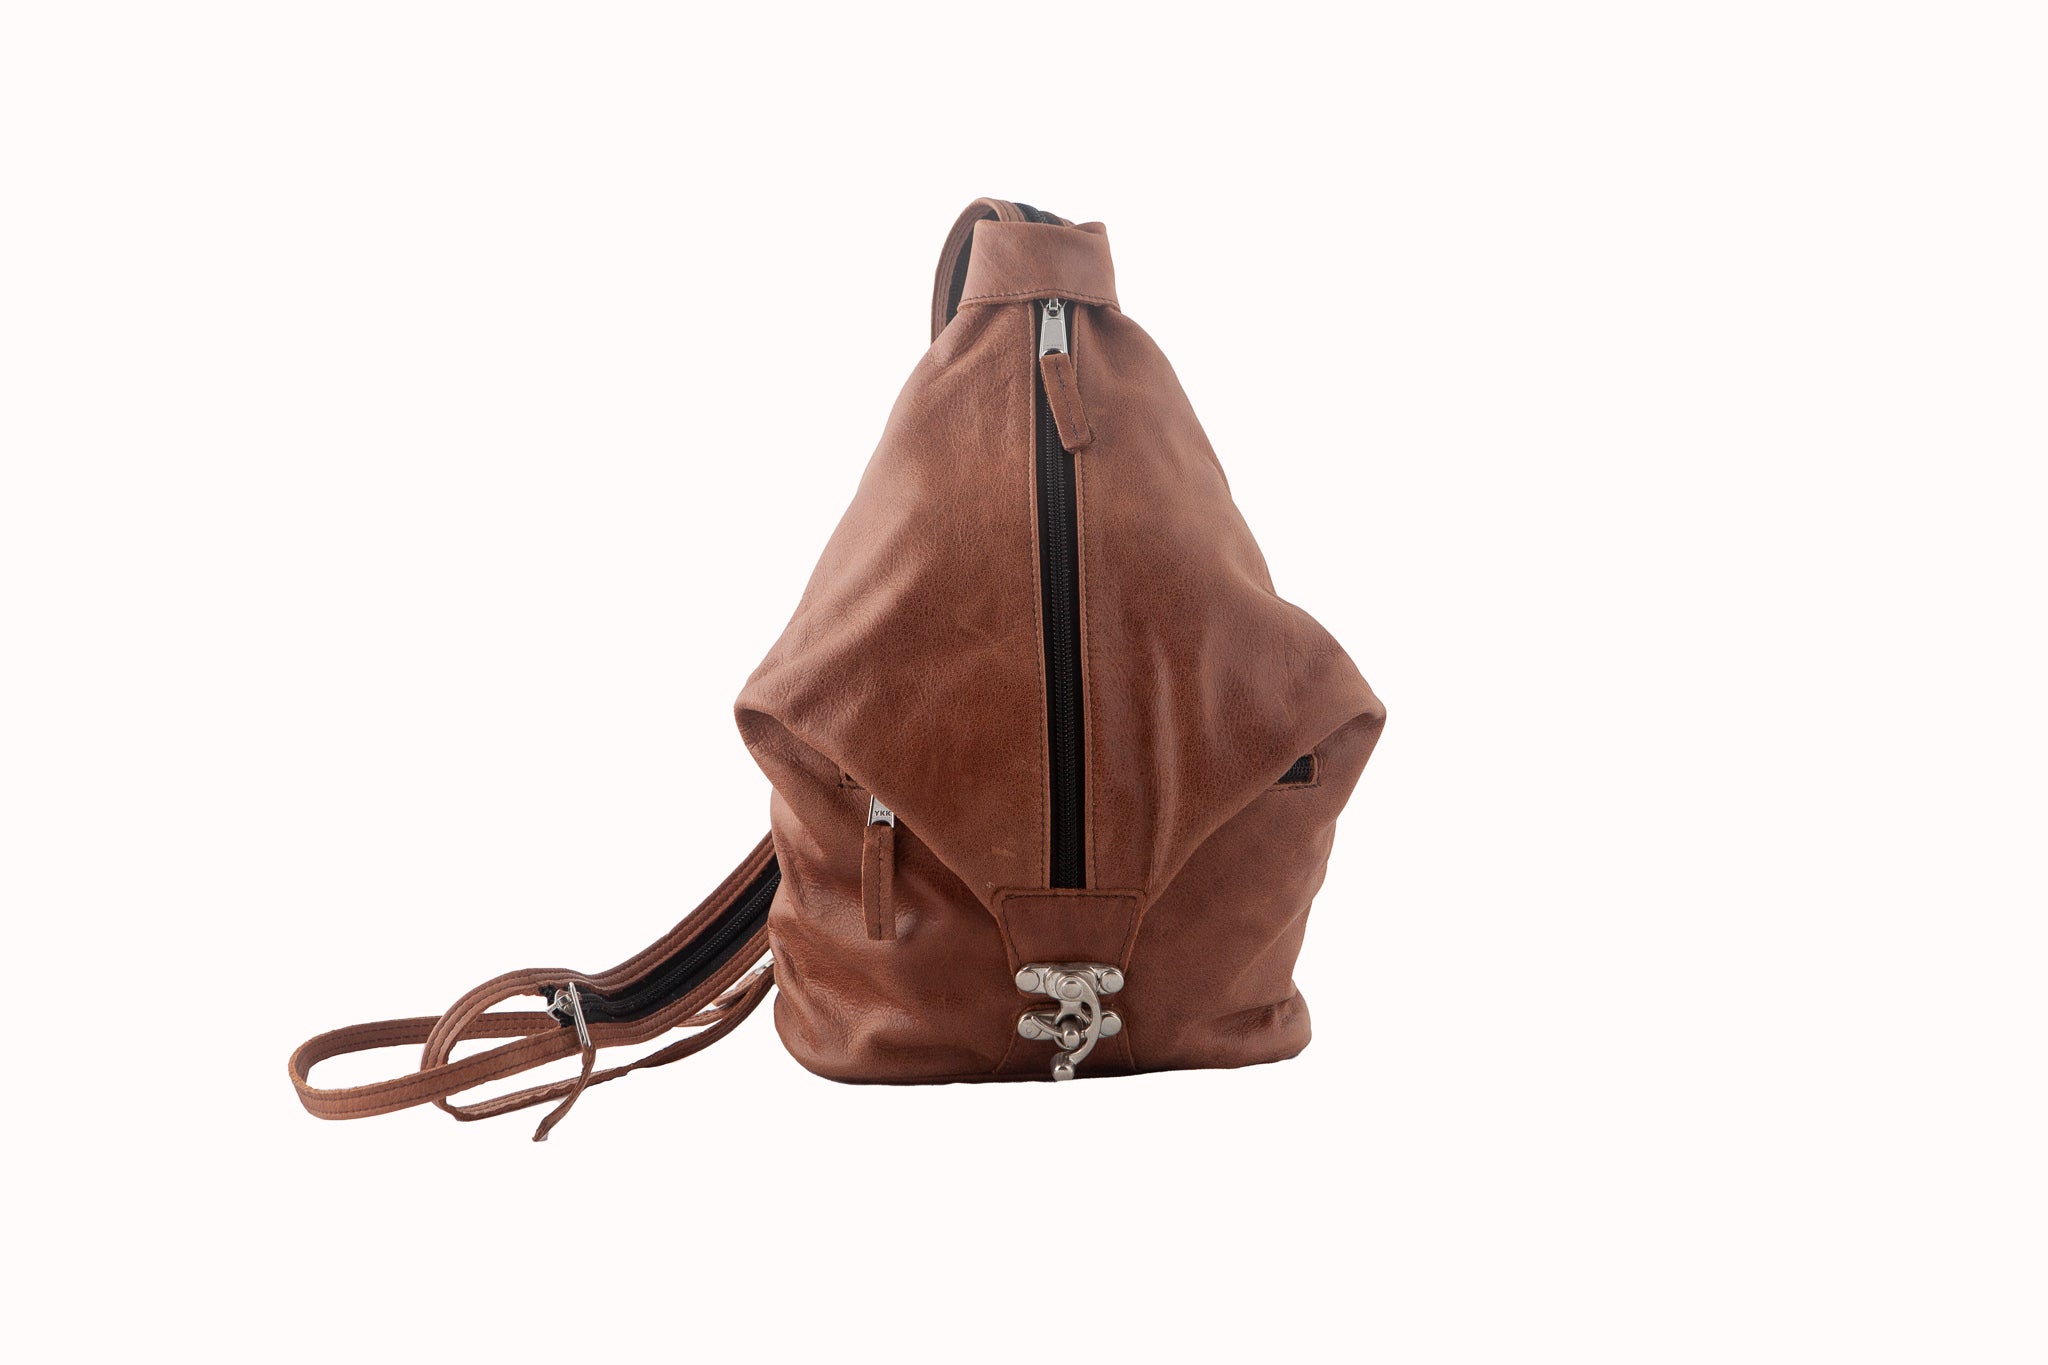 Mon's Backpack - Cowhide Leather